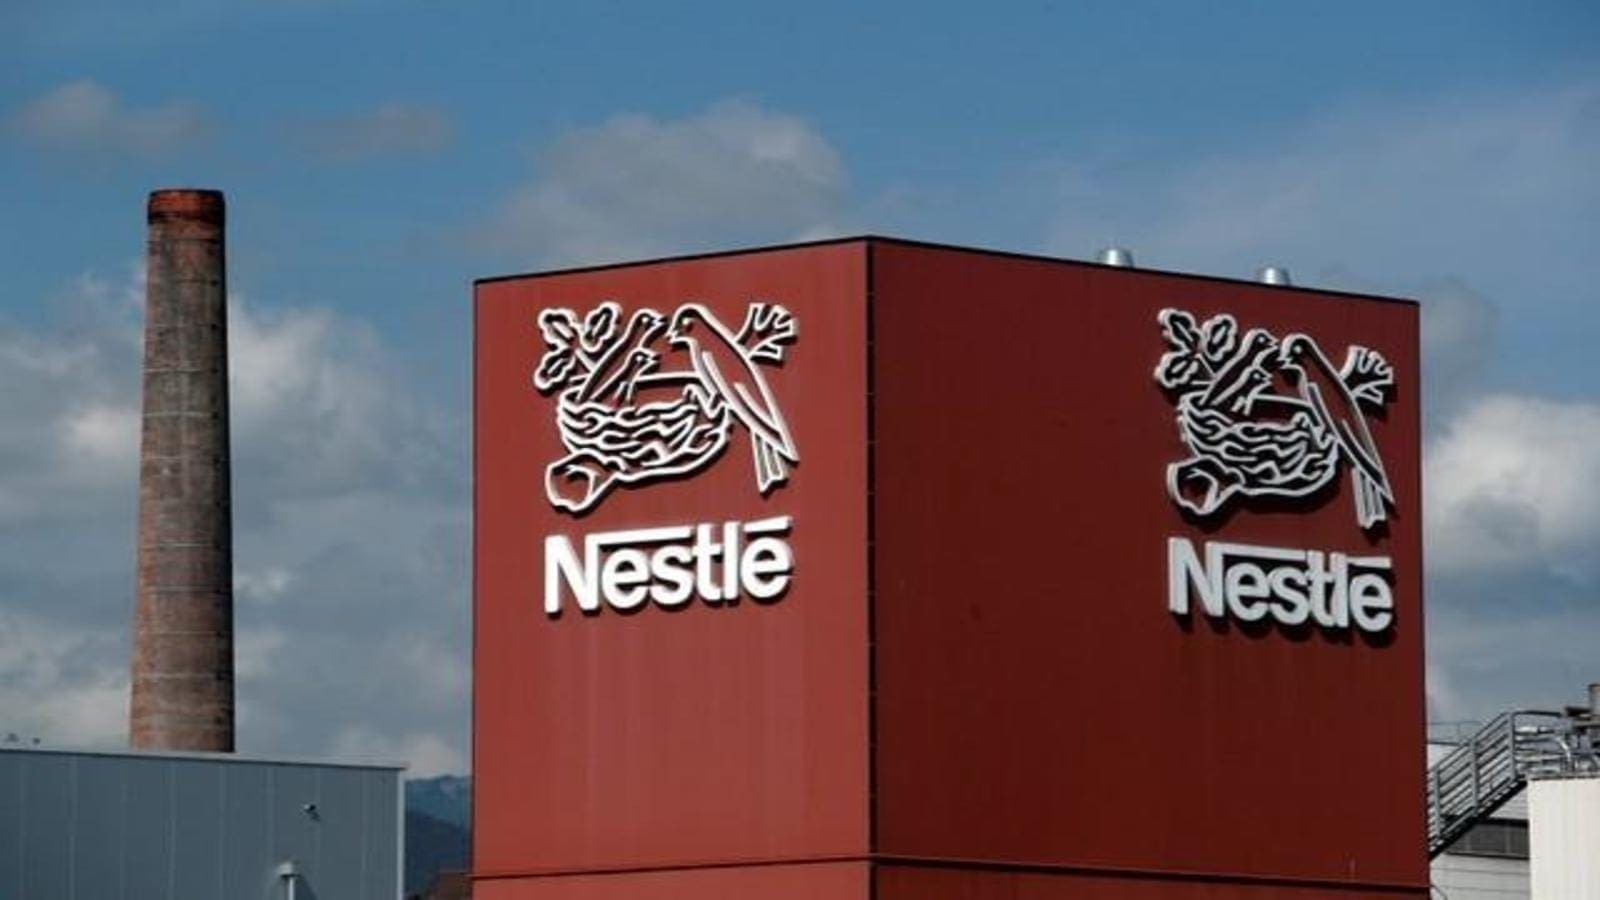 Nestlé organic growth jumps 7.6% buoyed by higher commodity prices